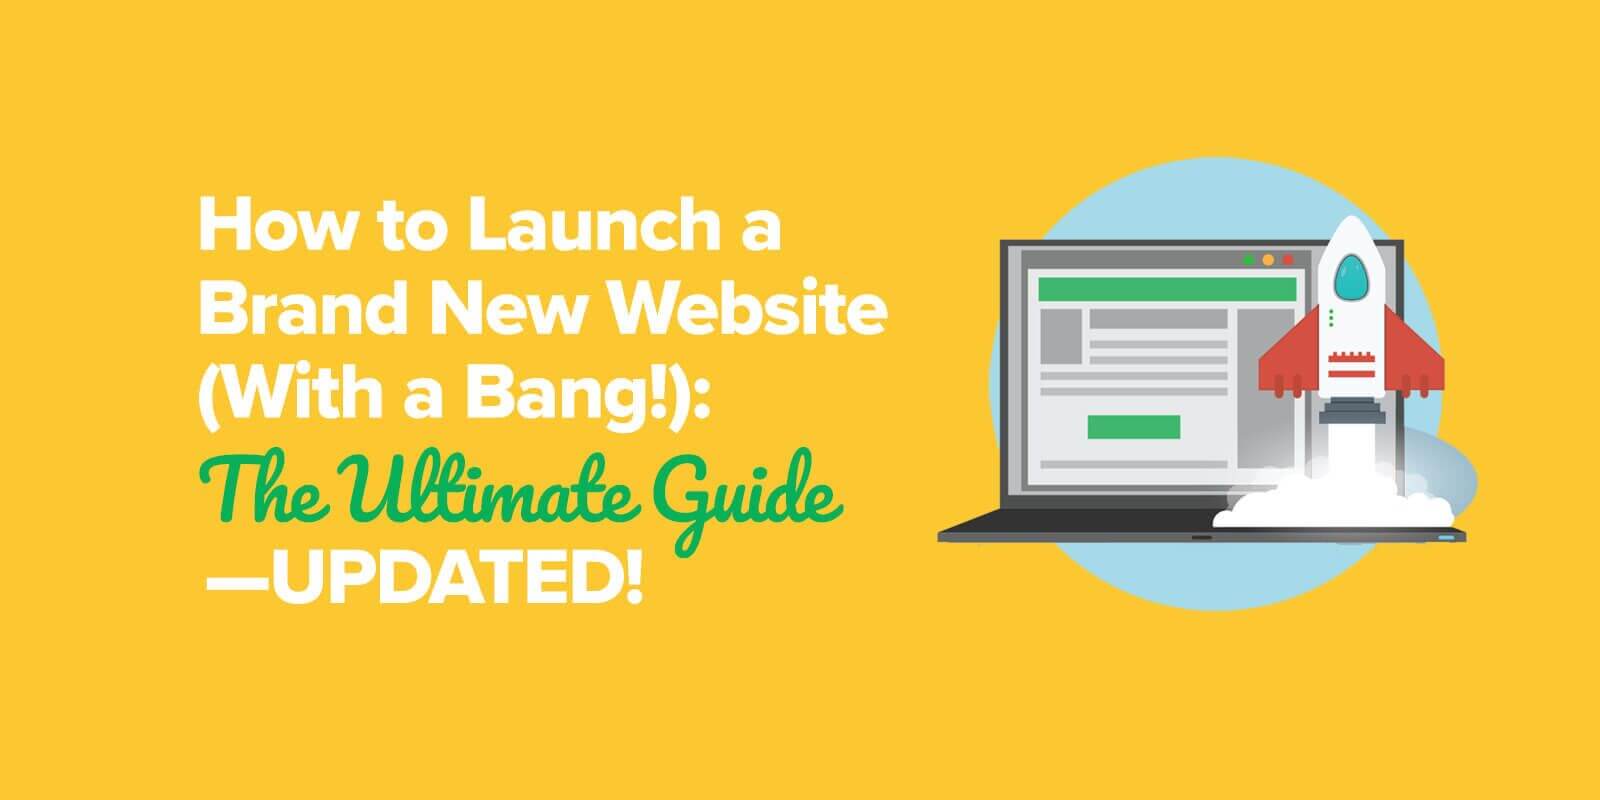 What Does Launching A Website Mean?